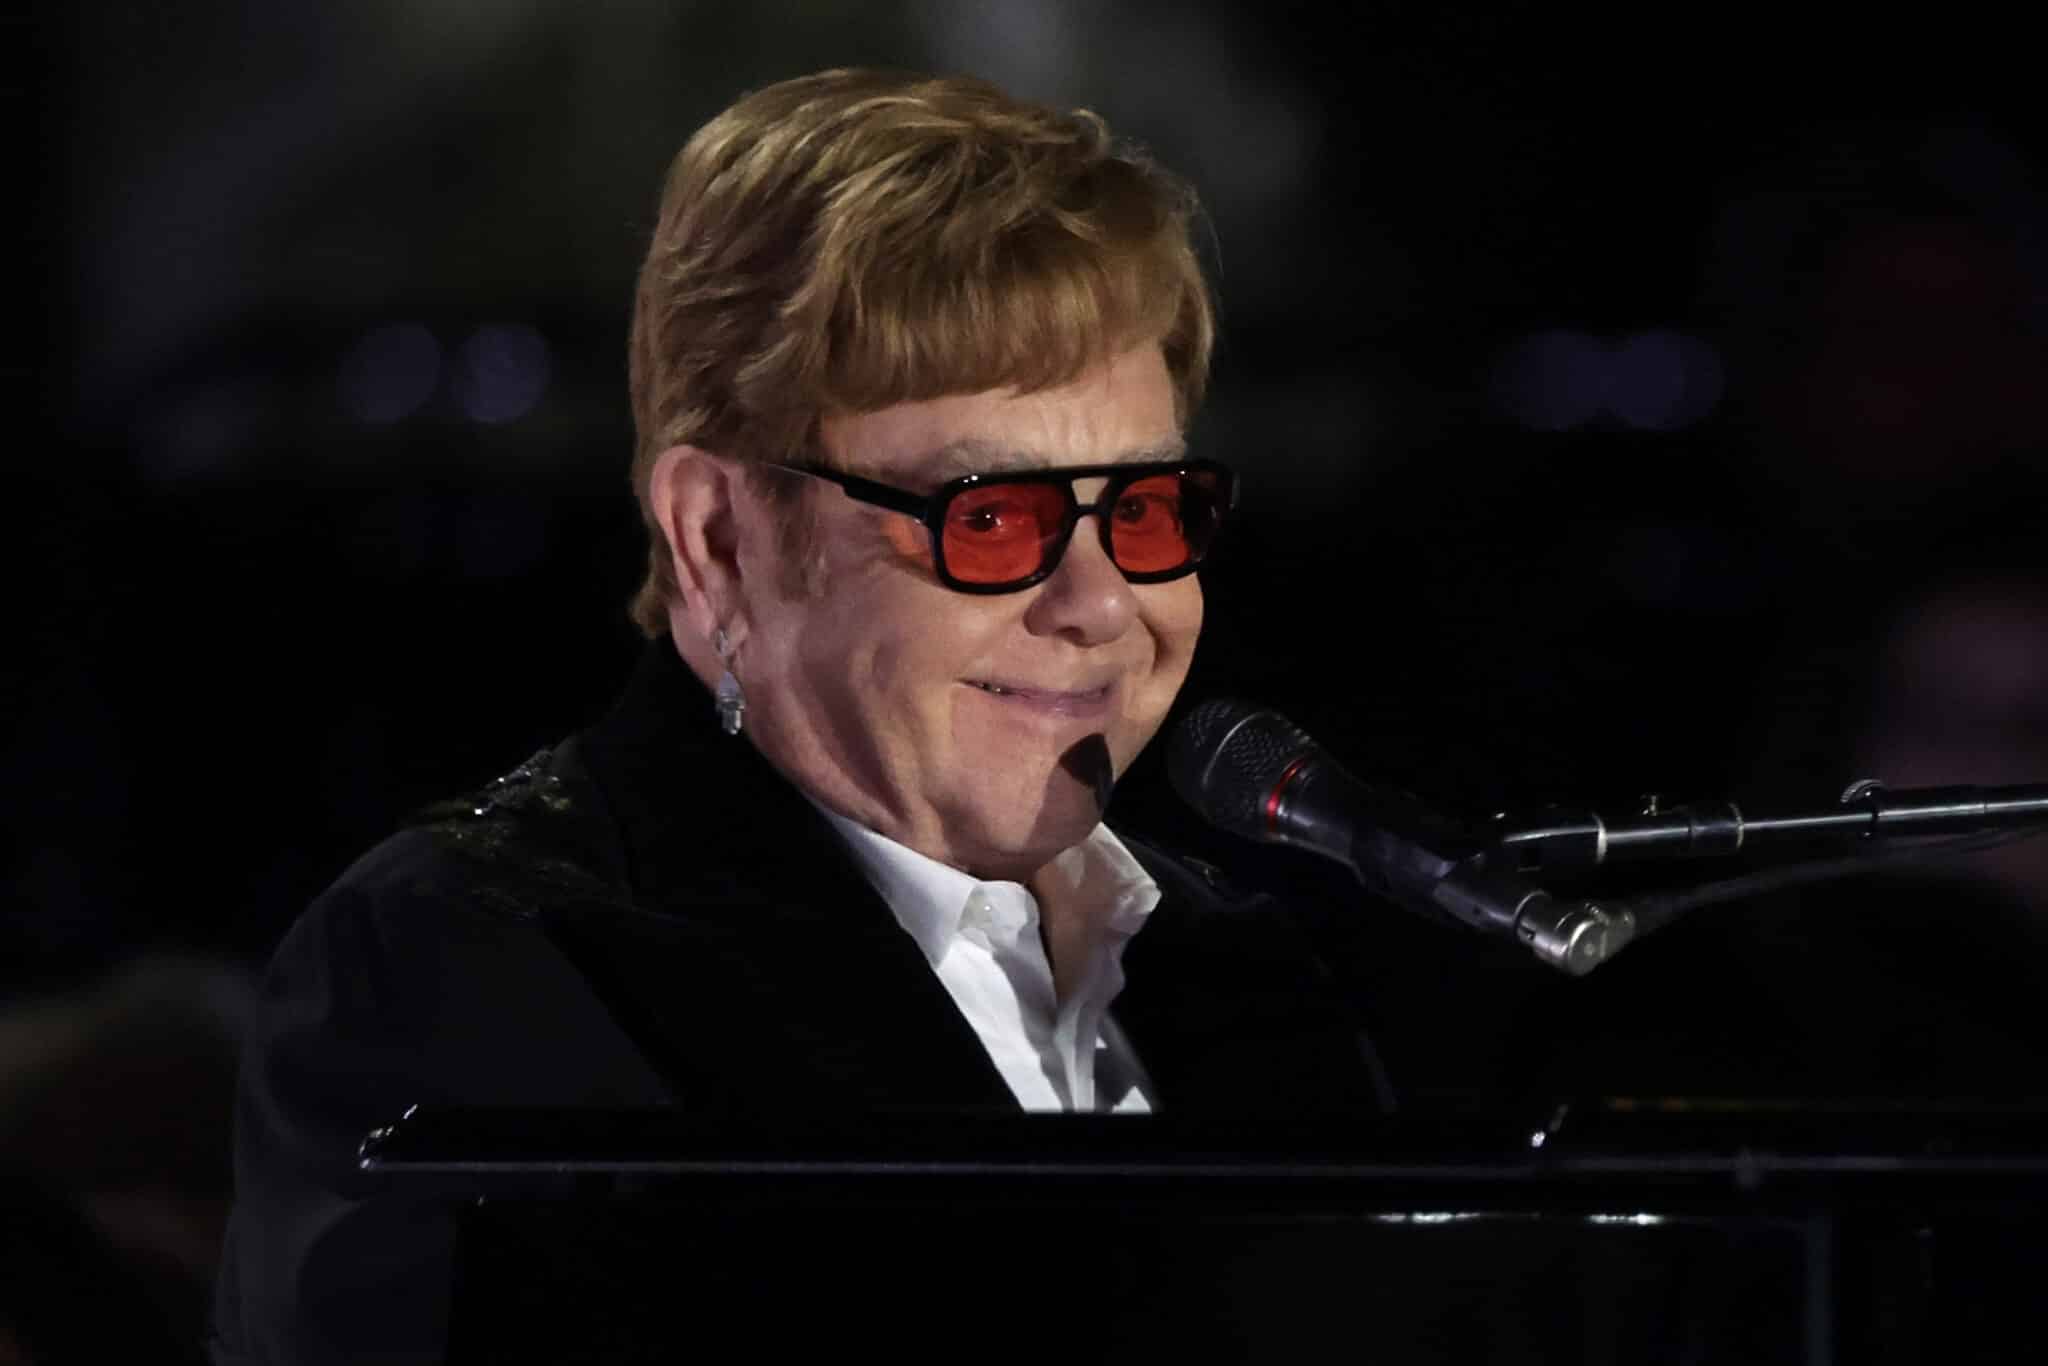 Sir Elton John performs during an event on the South Lawn of the White House